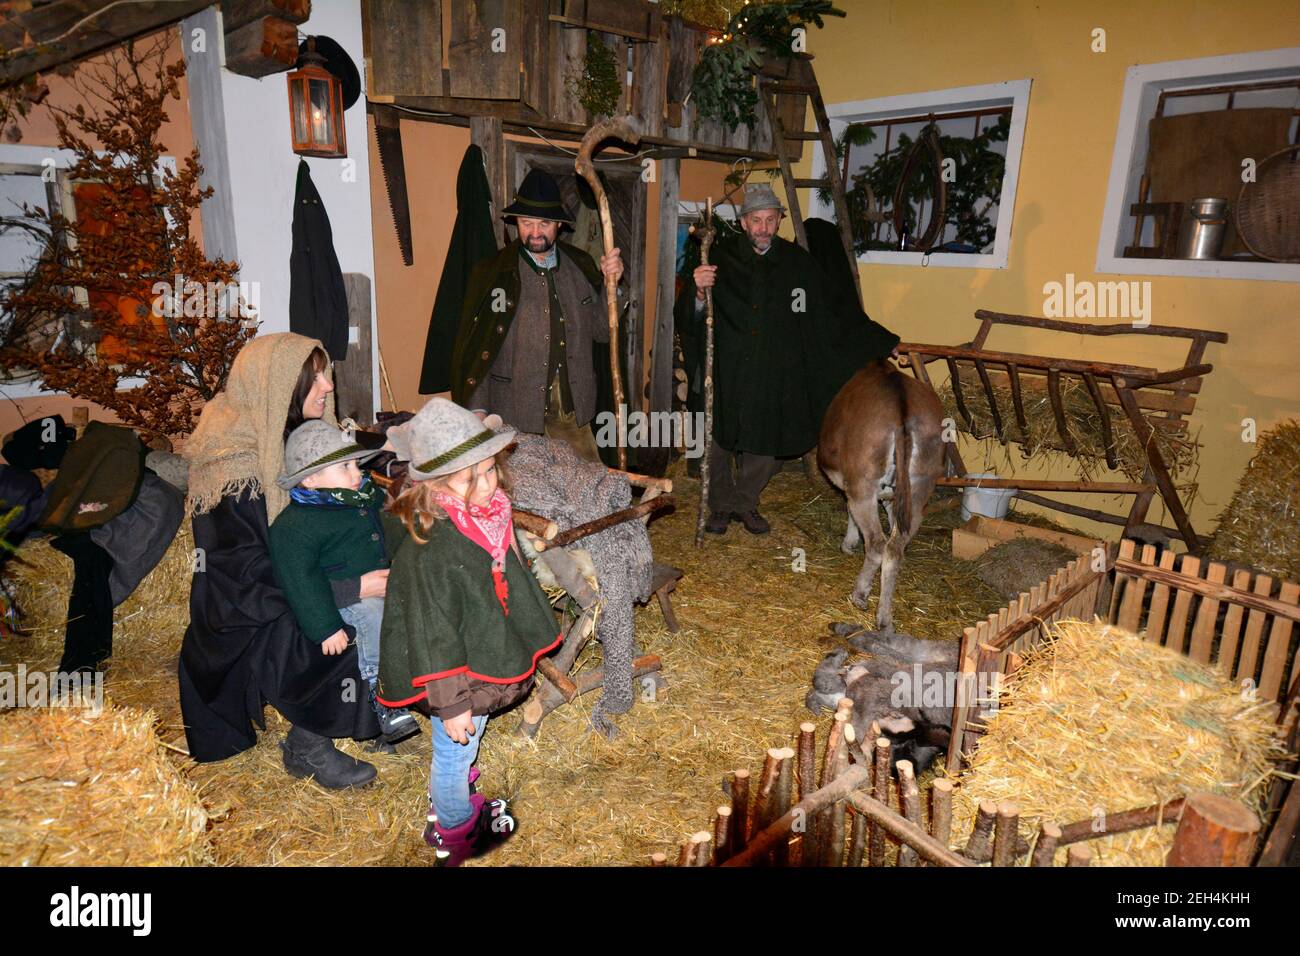 Rohr im Gebirge, Austria - December 14th 2014: Unidentified people with donkey performed a living crib, a yearly tradition in the tiny village in Lowe Stock Photo